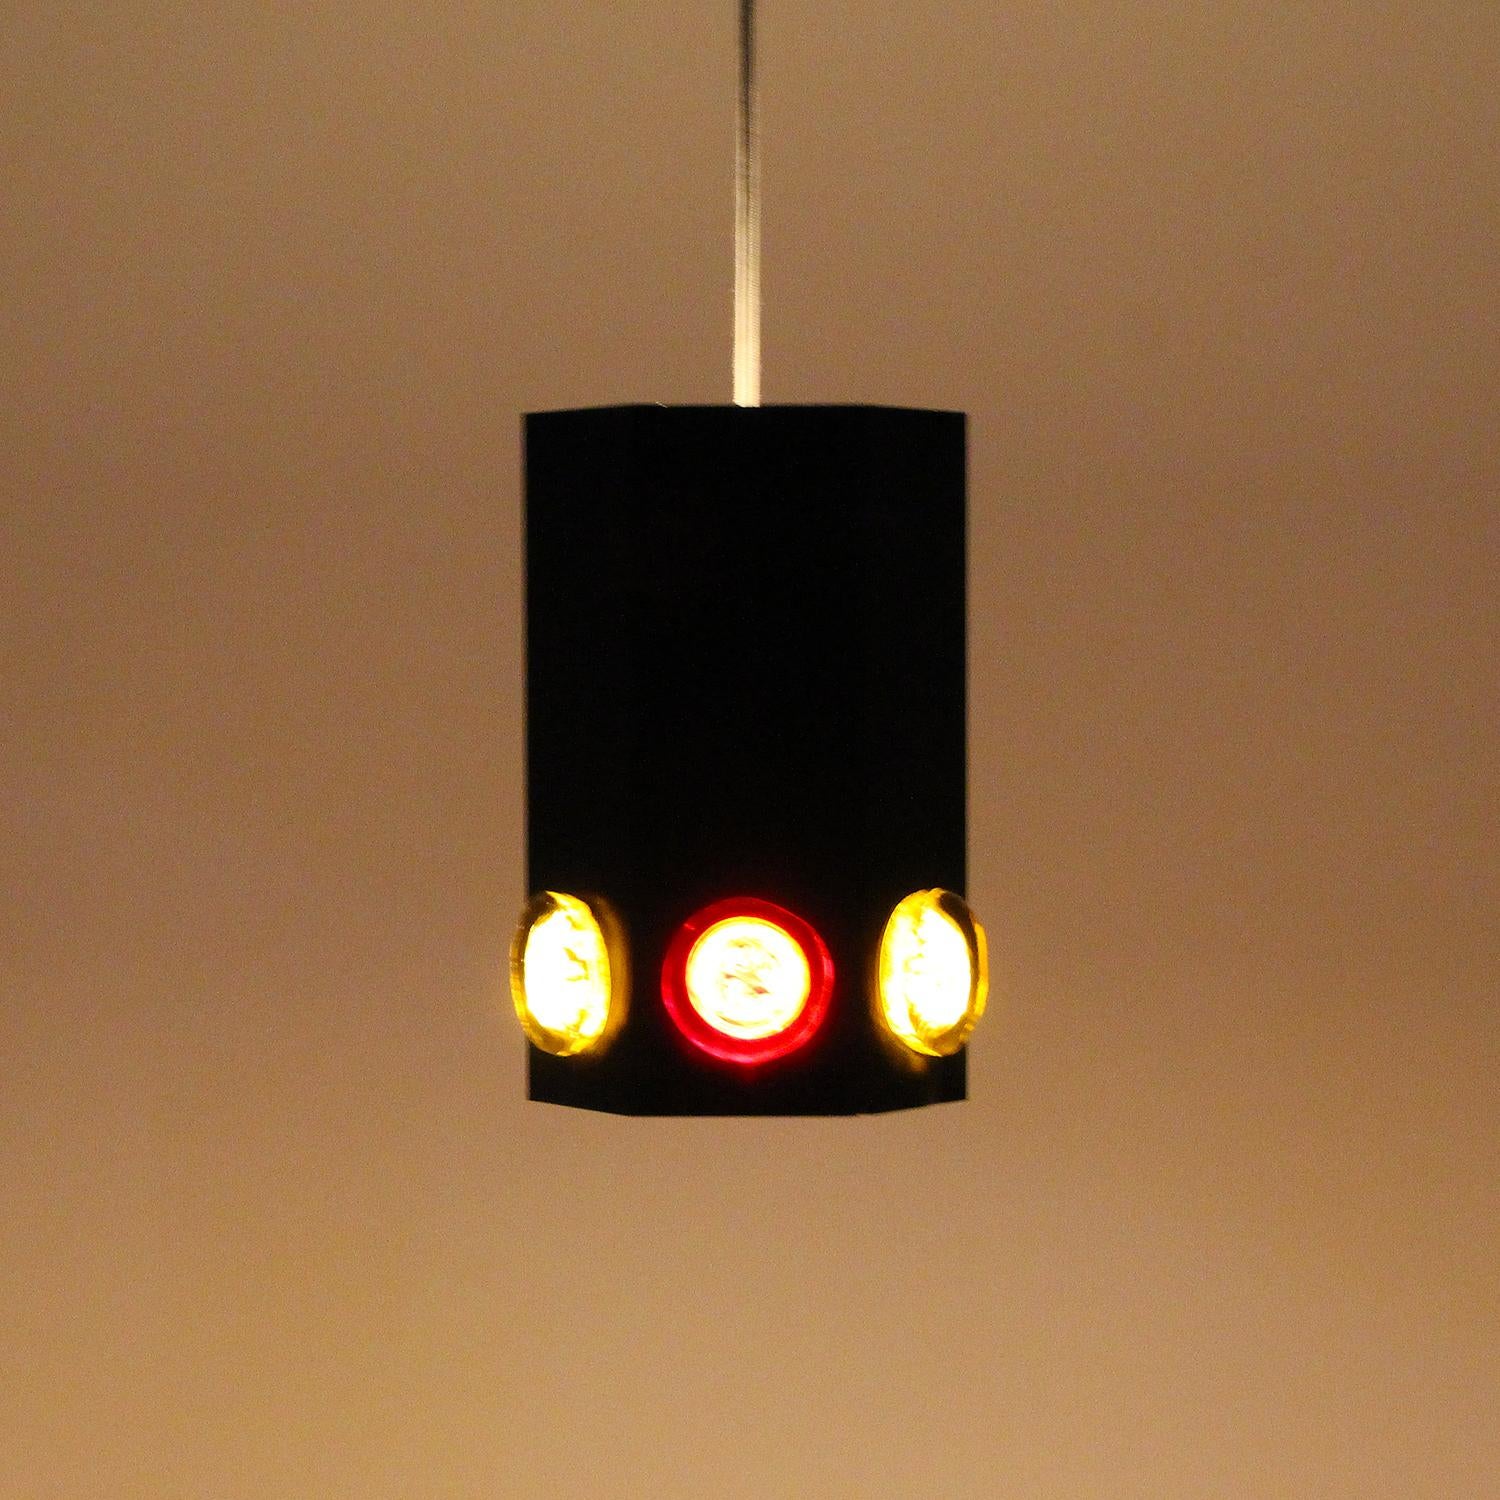 TYPE 6284, black pendant by Svend Aage Holm Sørensen in the 1960s - intriguing rare black lamp with yellow and red glass stones.

A hexagonal shaped metal pendant, lacquered black with white inner, and decorated with circular red and yellow glass